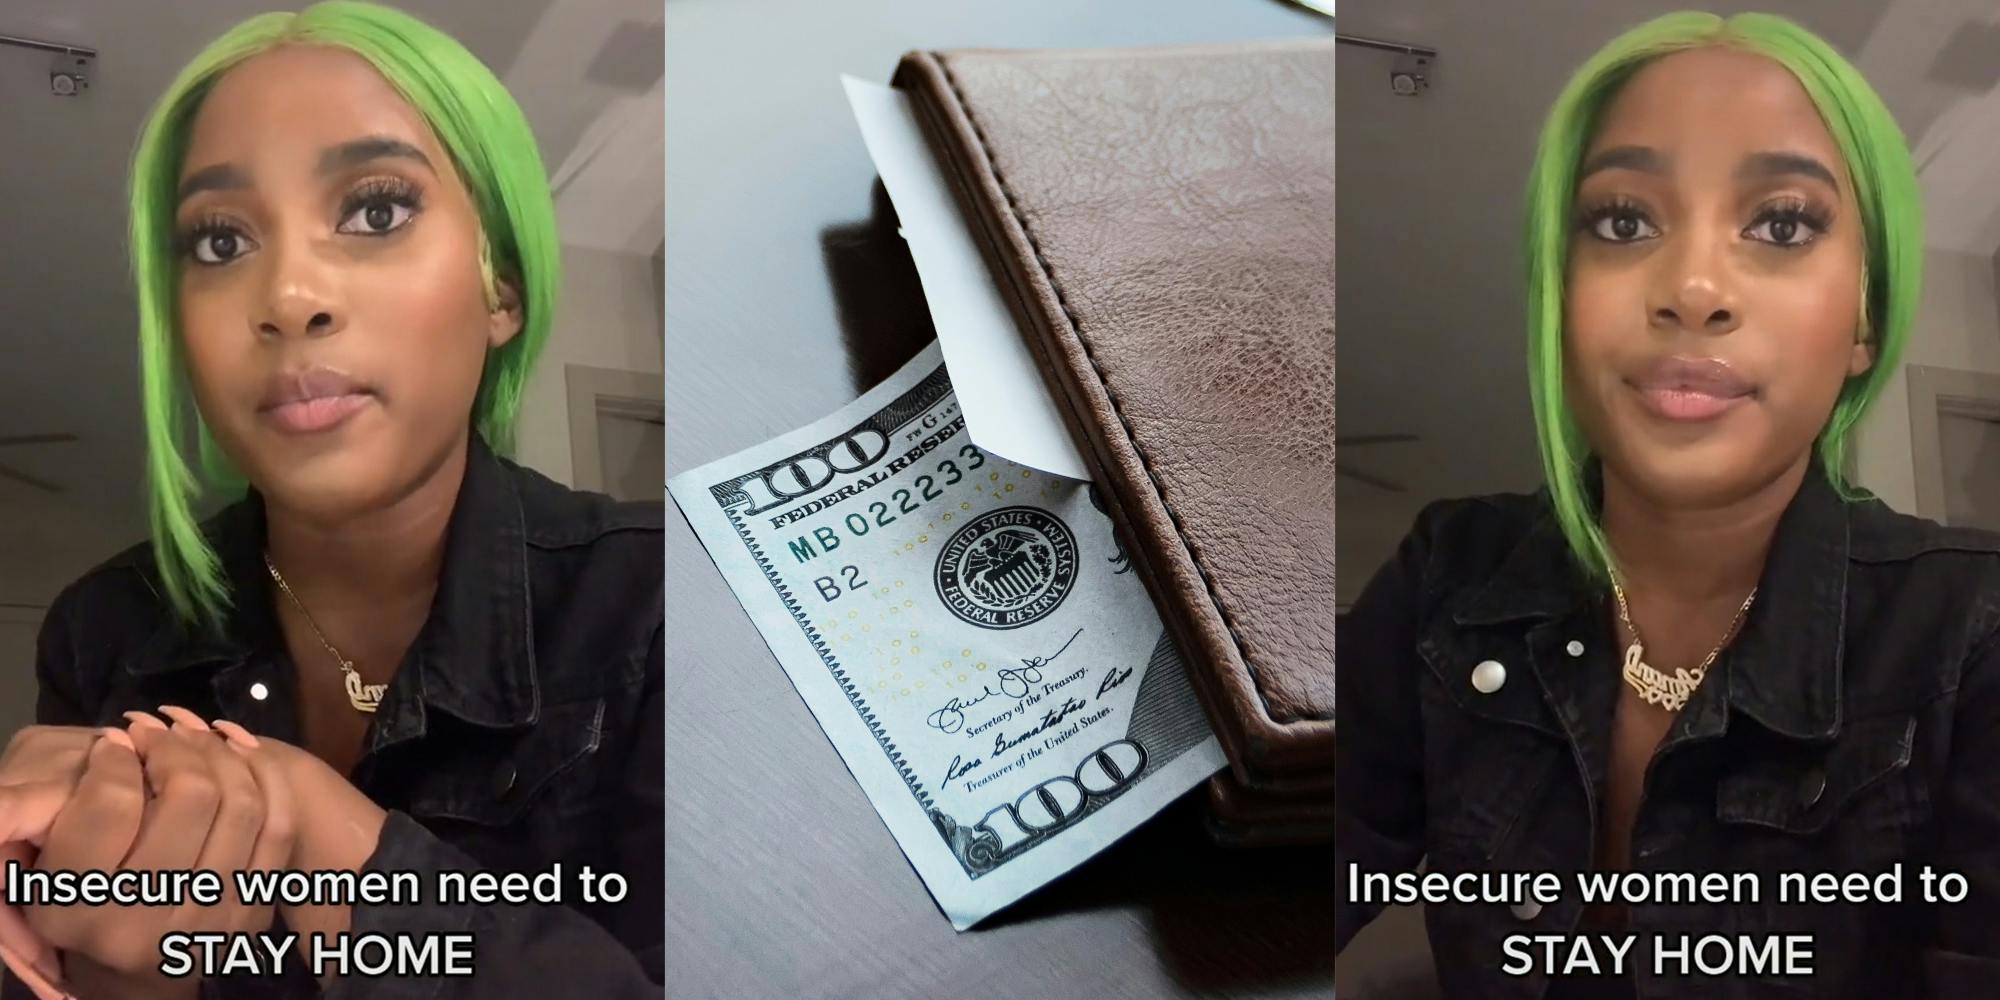 woman with green hair and caption "insecure women need to STAY HOME" (l&r) hundred dollar bill in restaurant bill holder (c)